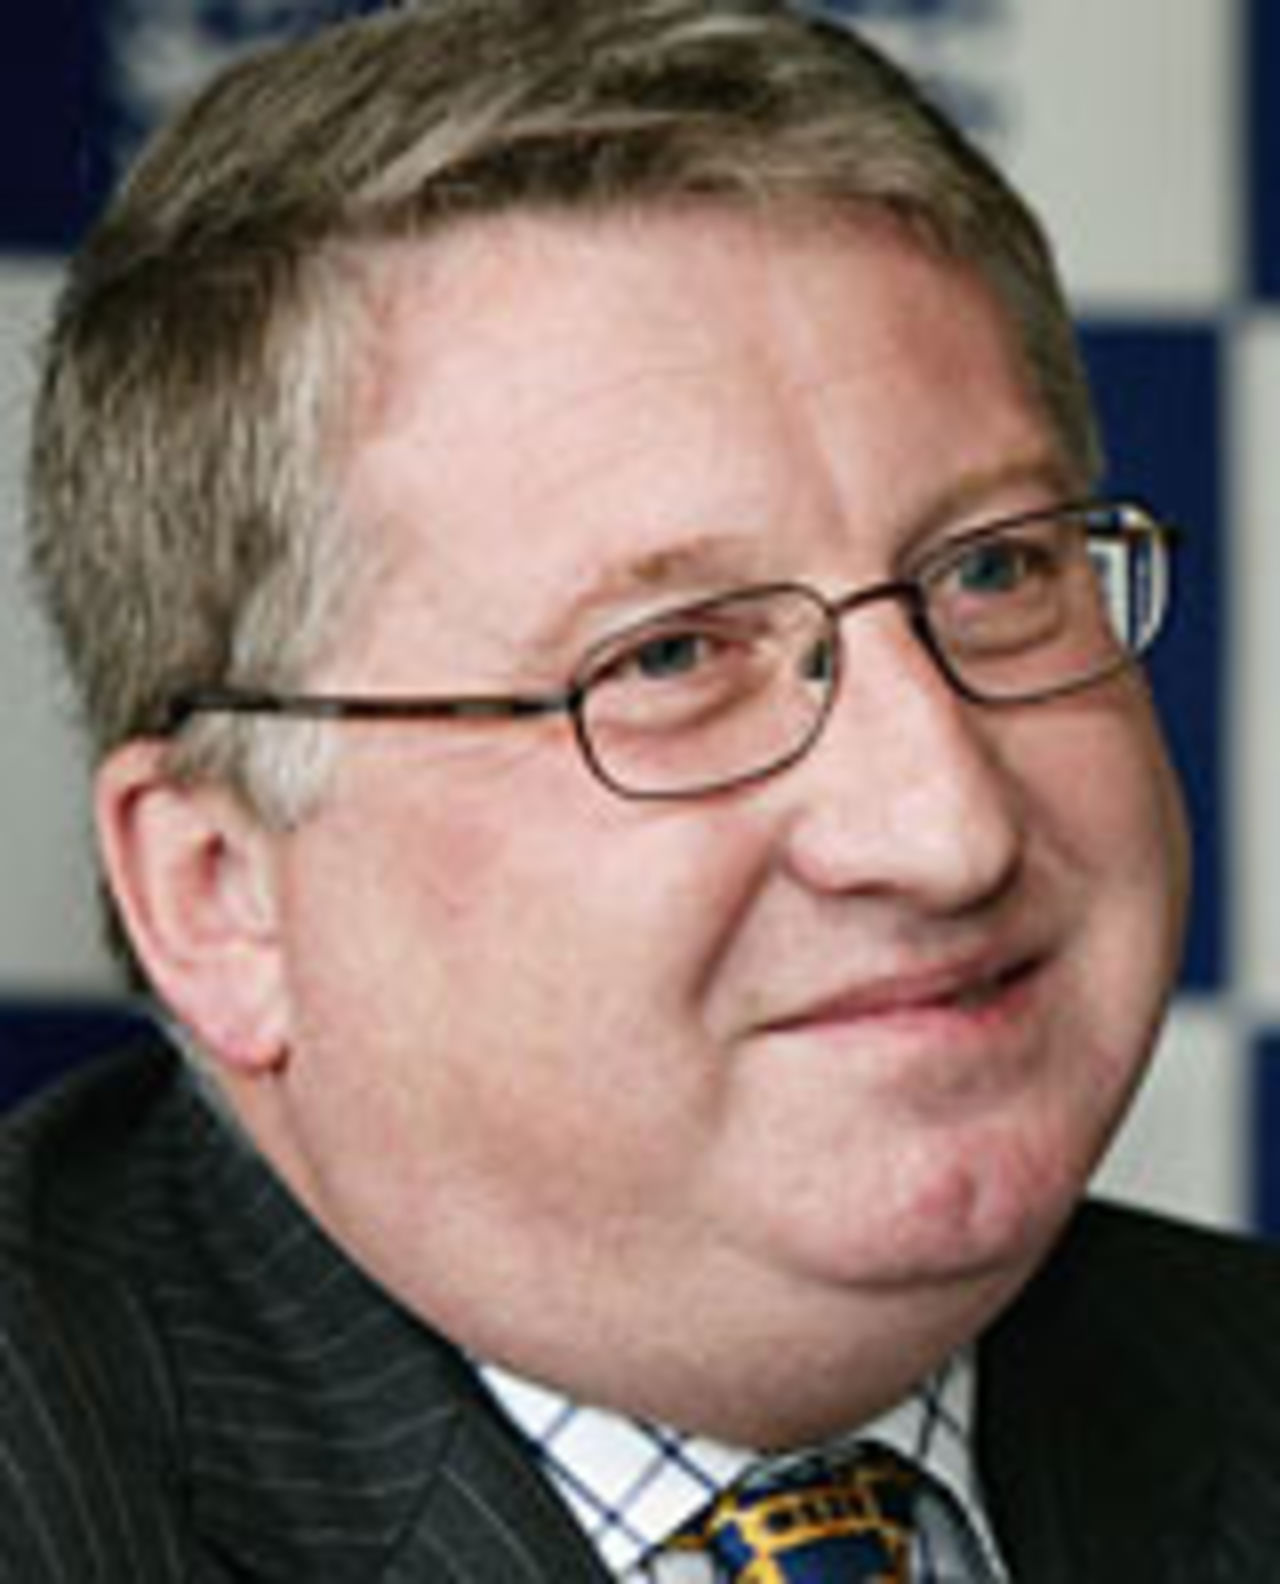 David Collier, the ECB's new chief executive, Lord's October 13, 2004